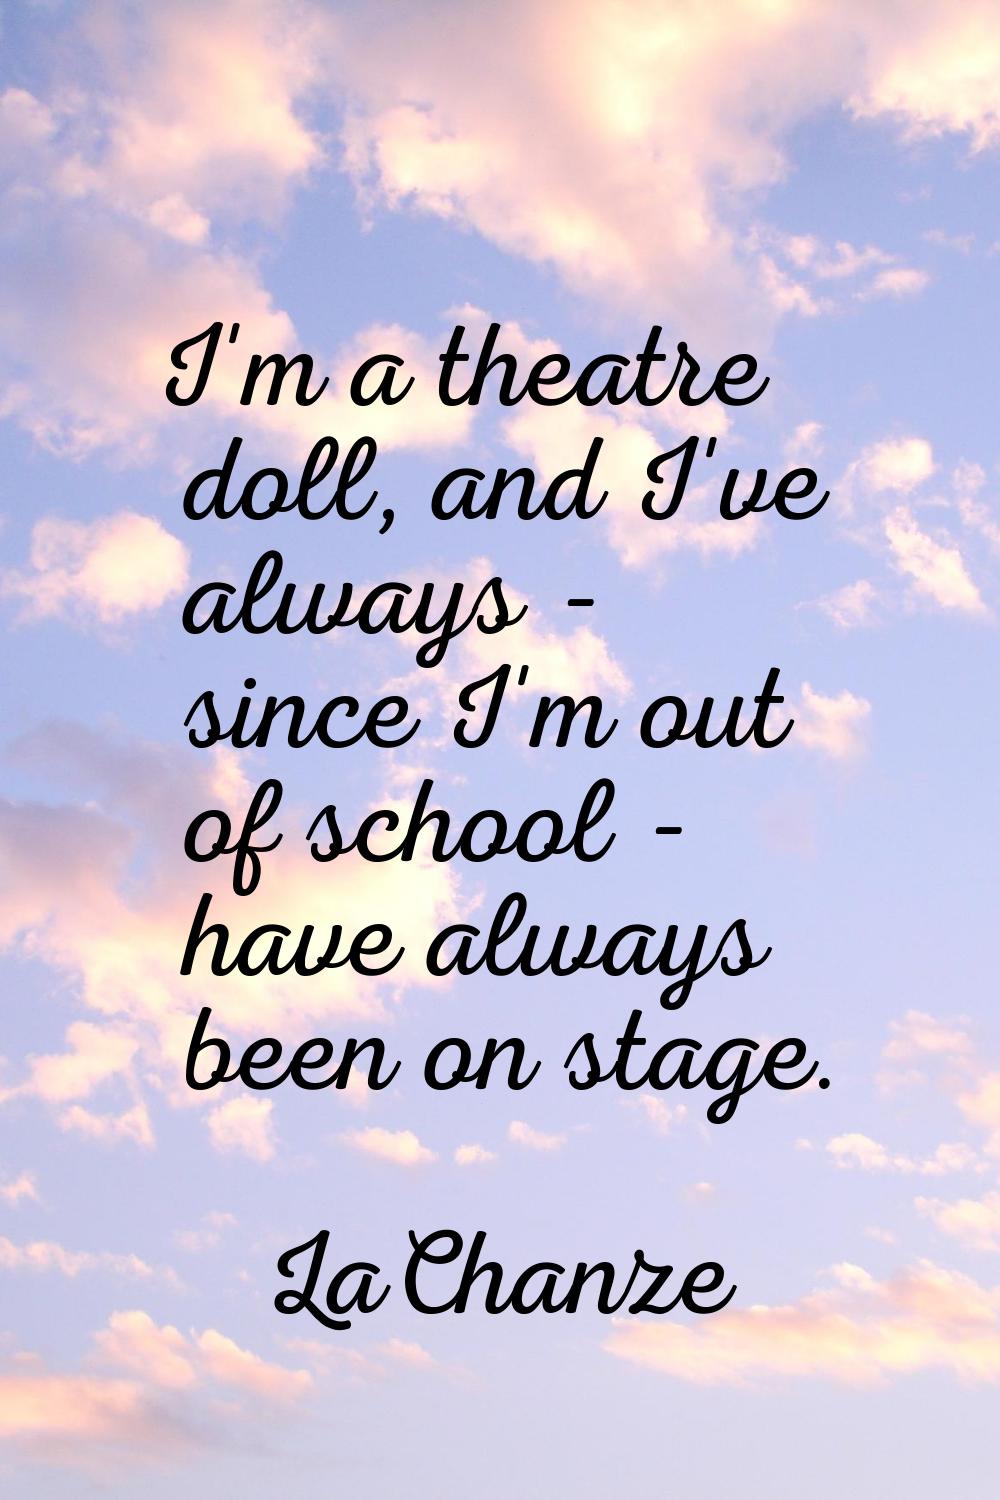 I'm a theatre doll, and I've always - since I'm out of school - have always been on stage.